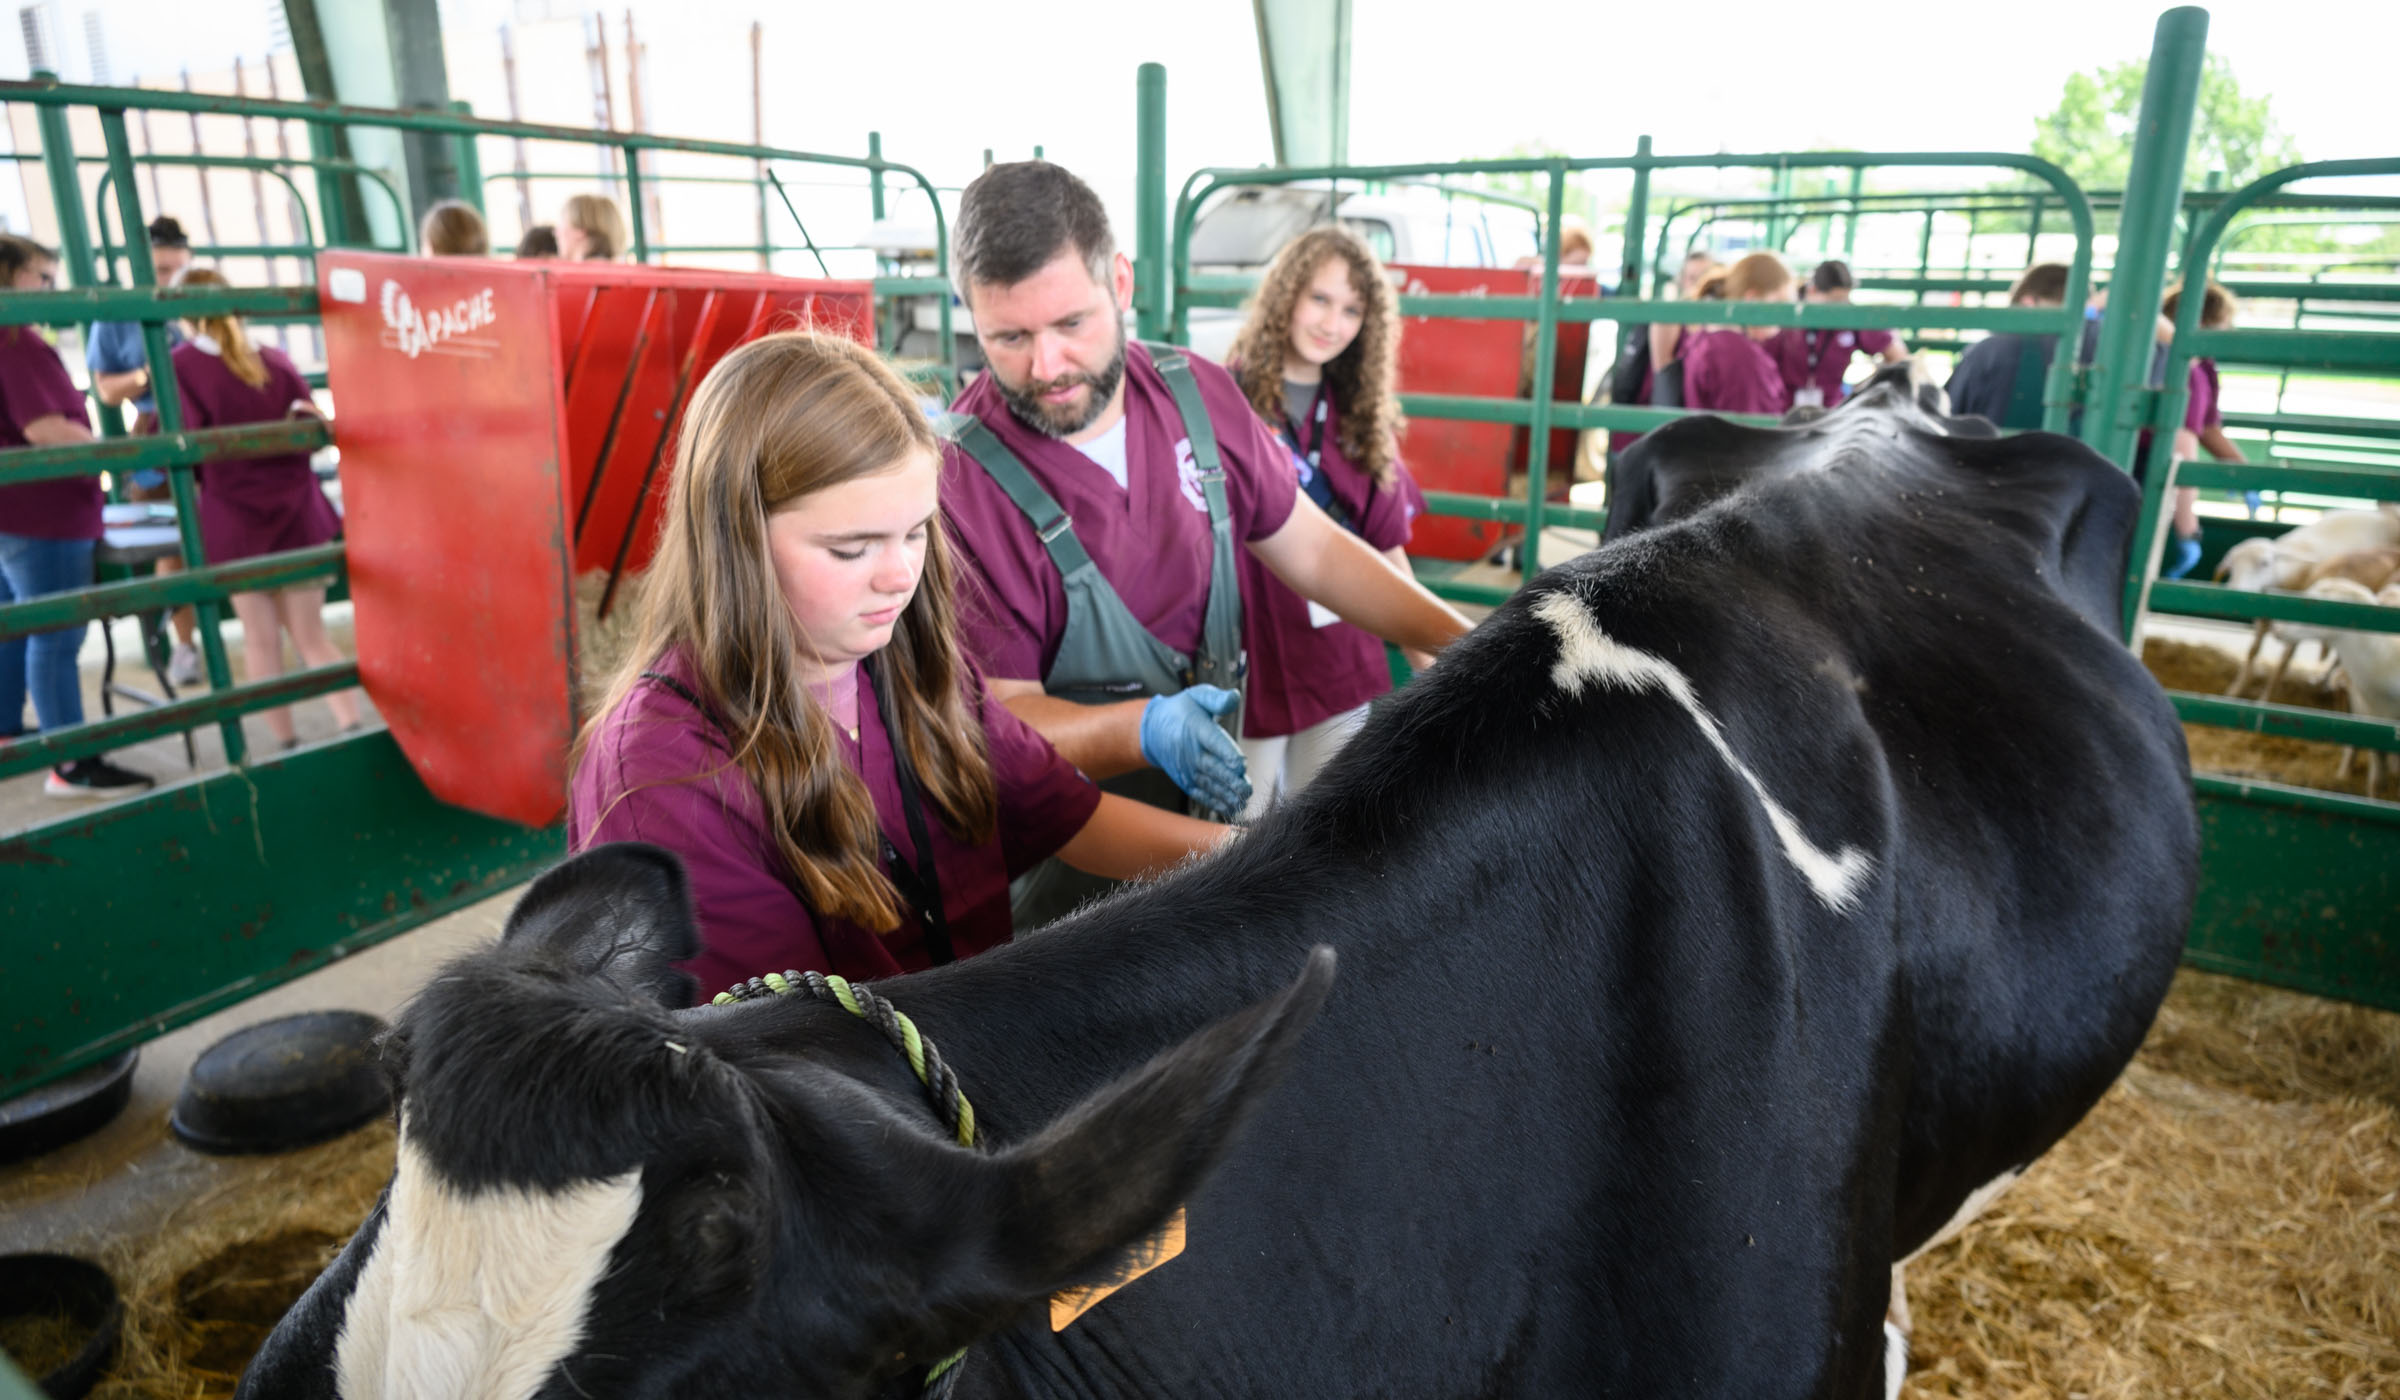 Dr. Michael Pesato, explains the examination of a cow to 13-year-old, Georgia Dugdale from Ruston, LA.  Georgia is participating in day camp at one of the six College of Veterinary Medicine Vet Camps held this year. 